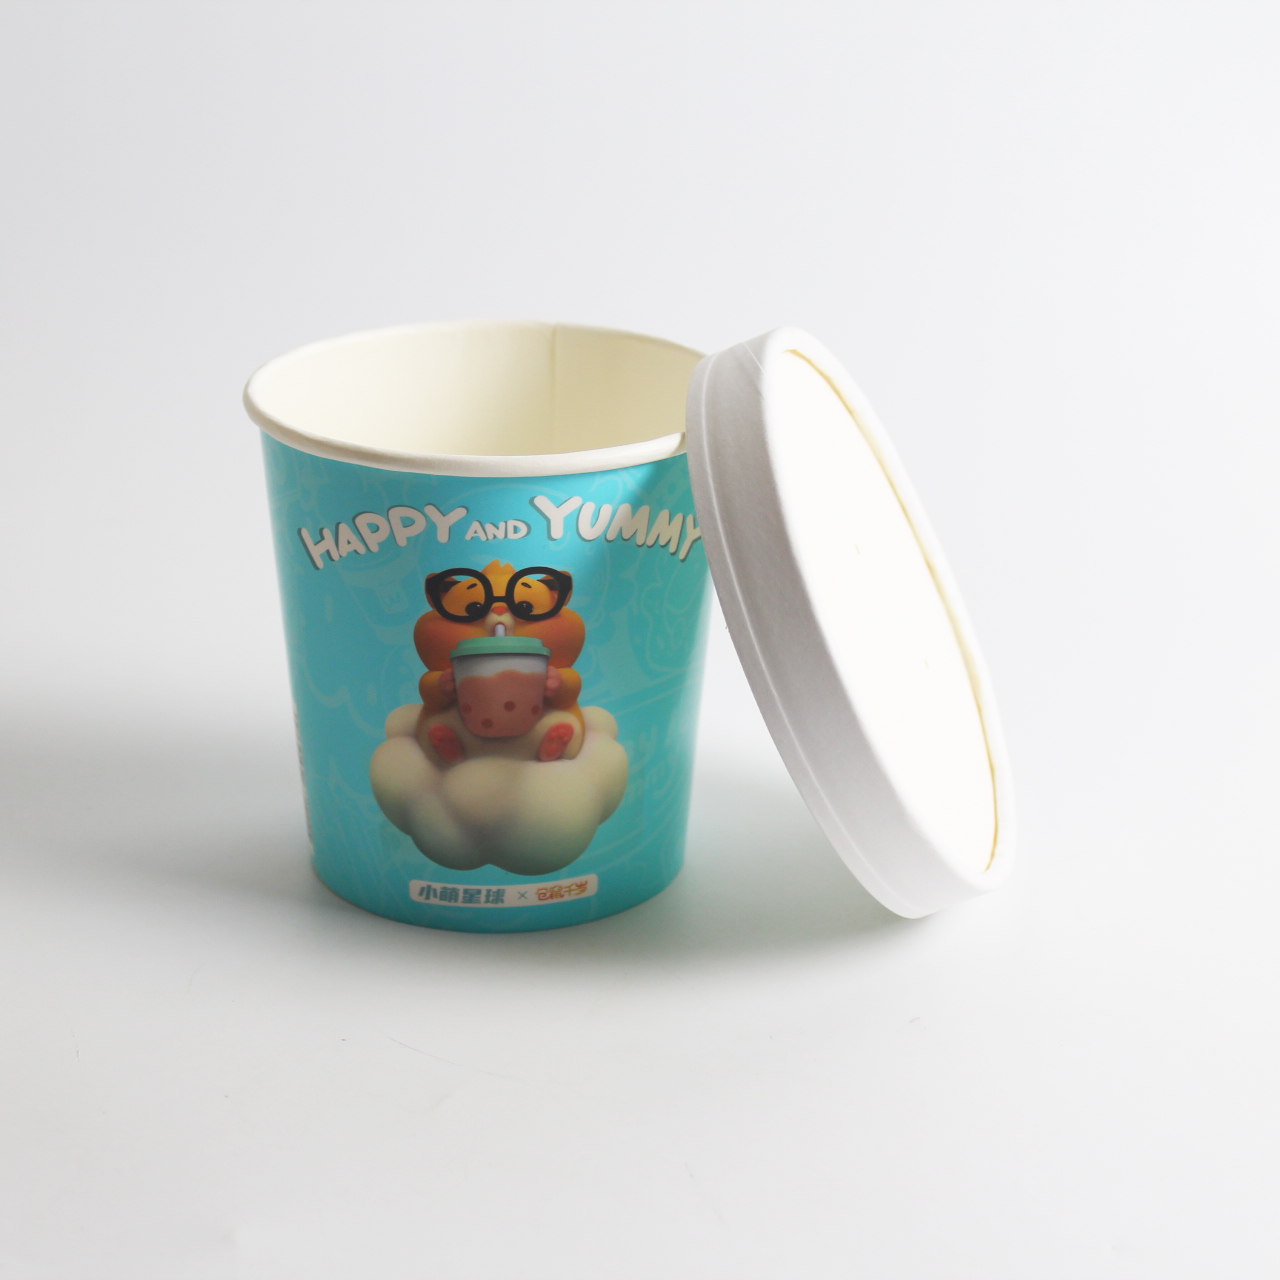 https://www.tuobopackages.com/12oz-ice-cream-cups-custom-printed-cups-for-frozen-dessert-tuobo-product/